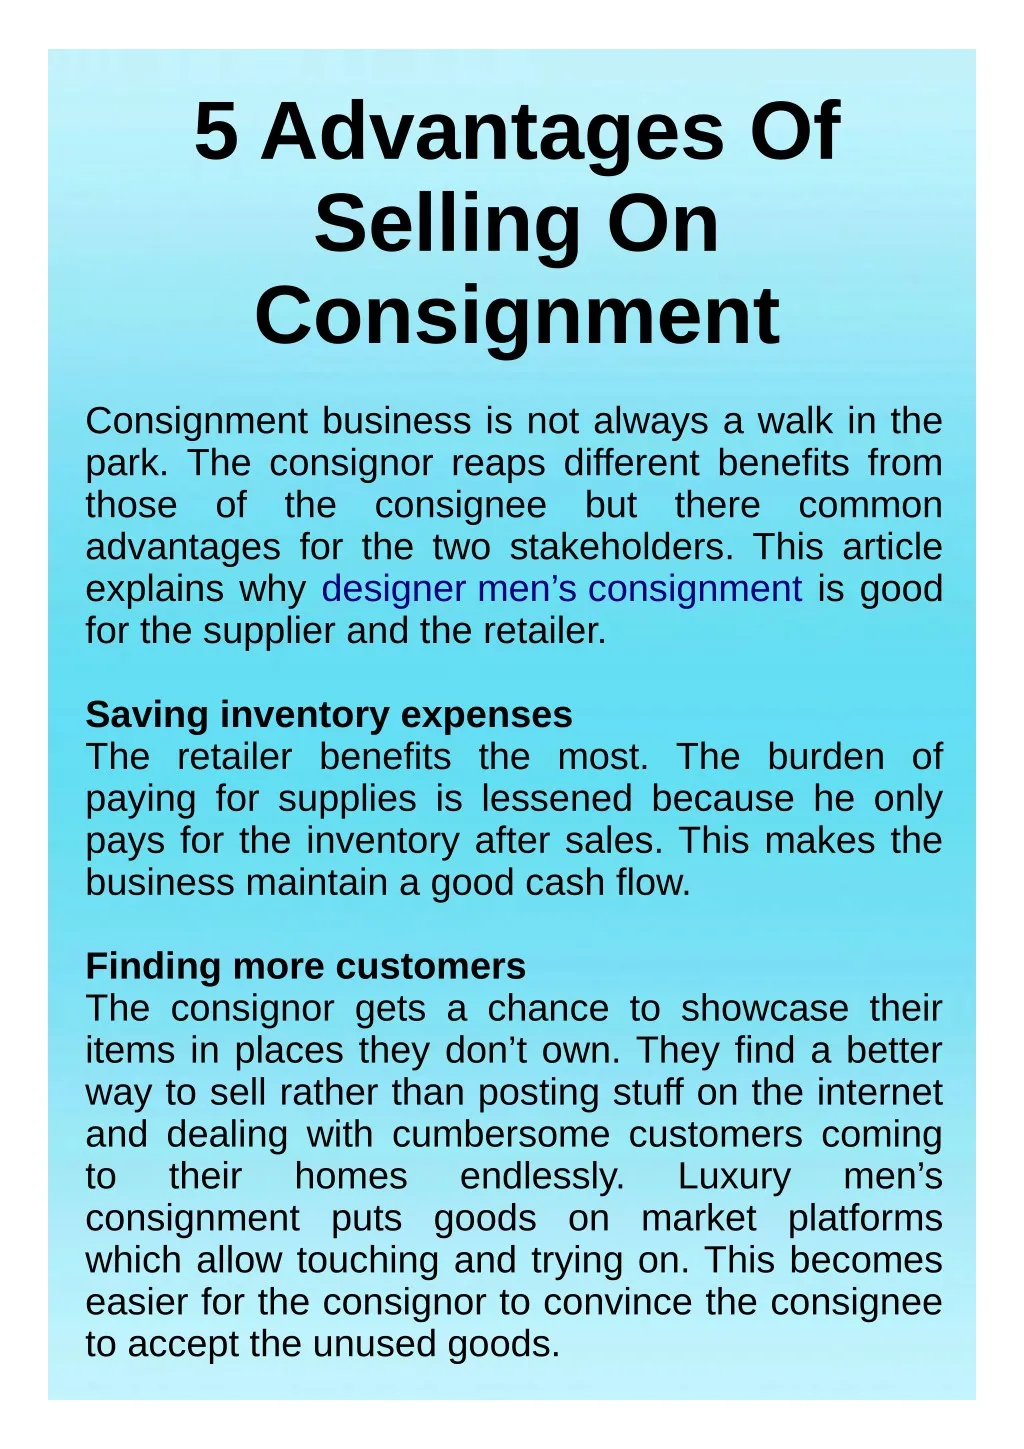 5 advantages of selling on consignment